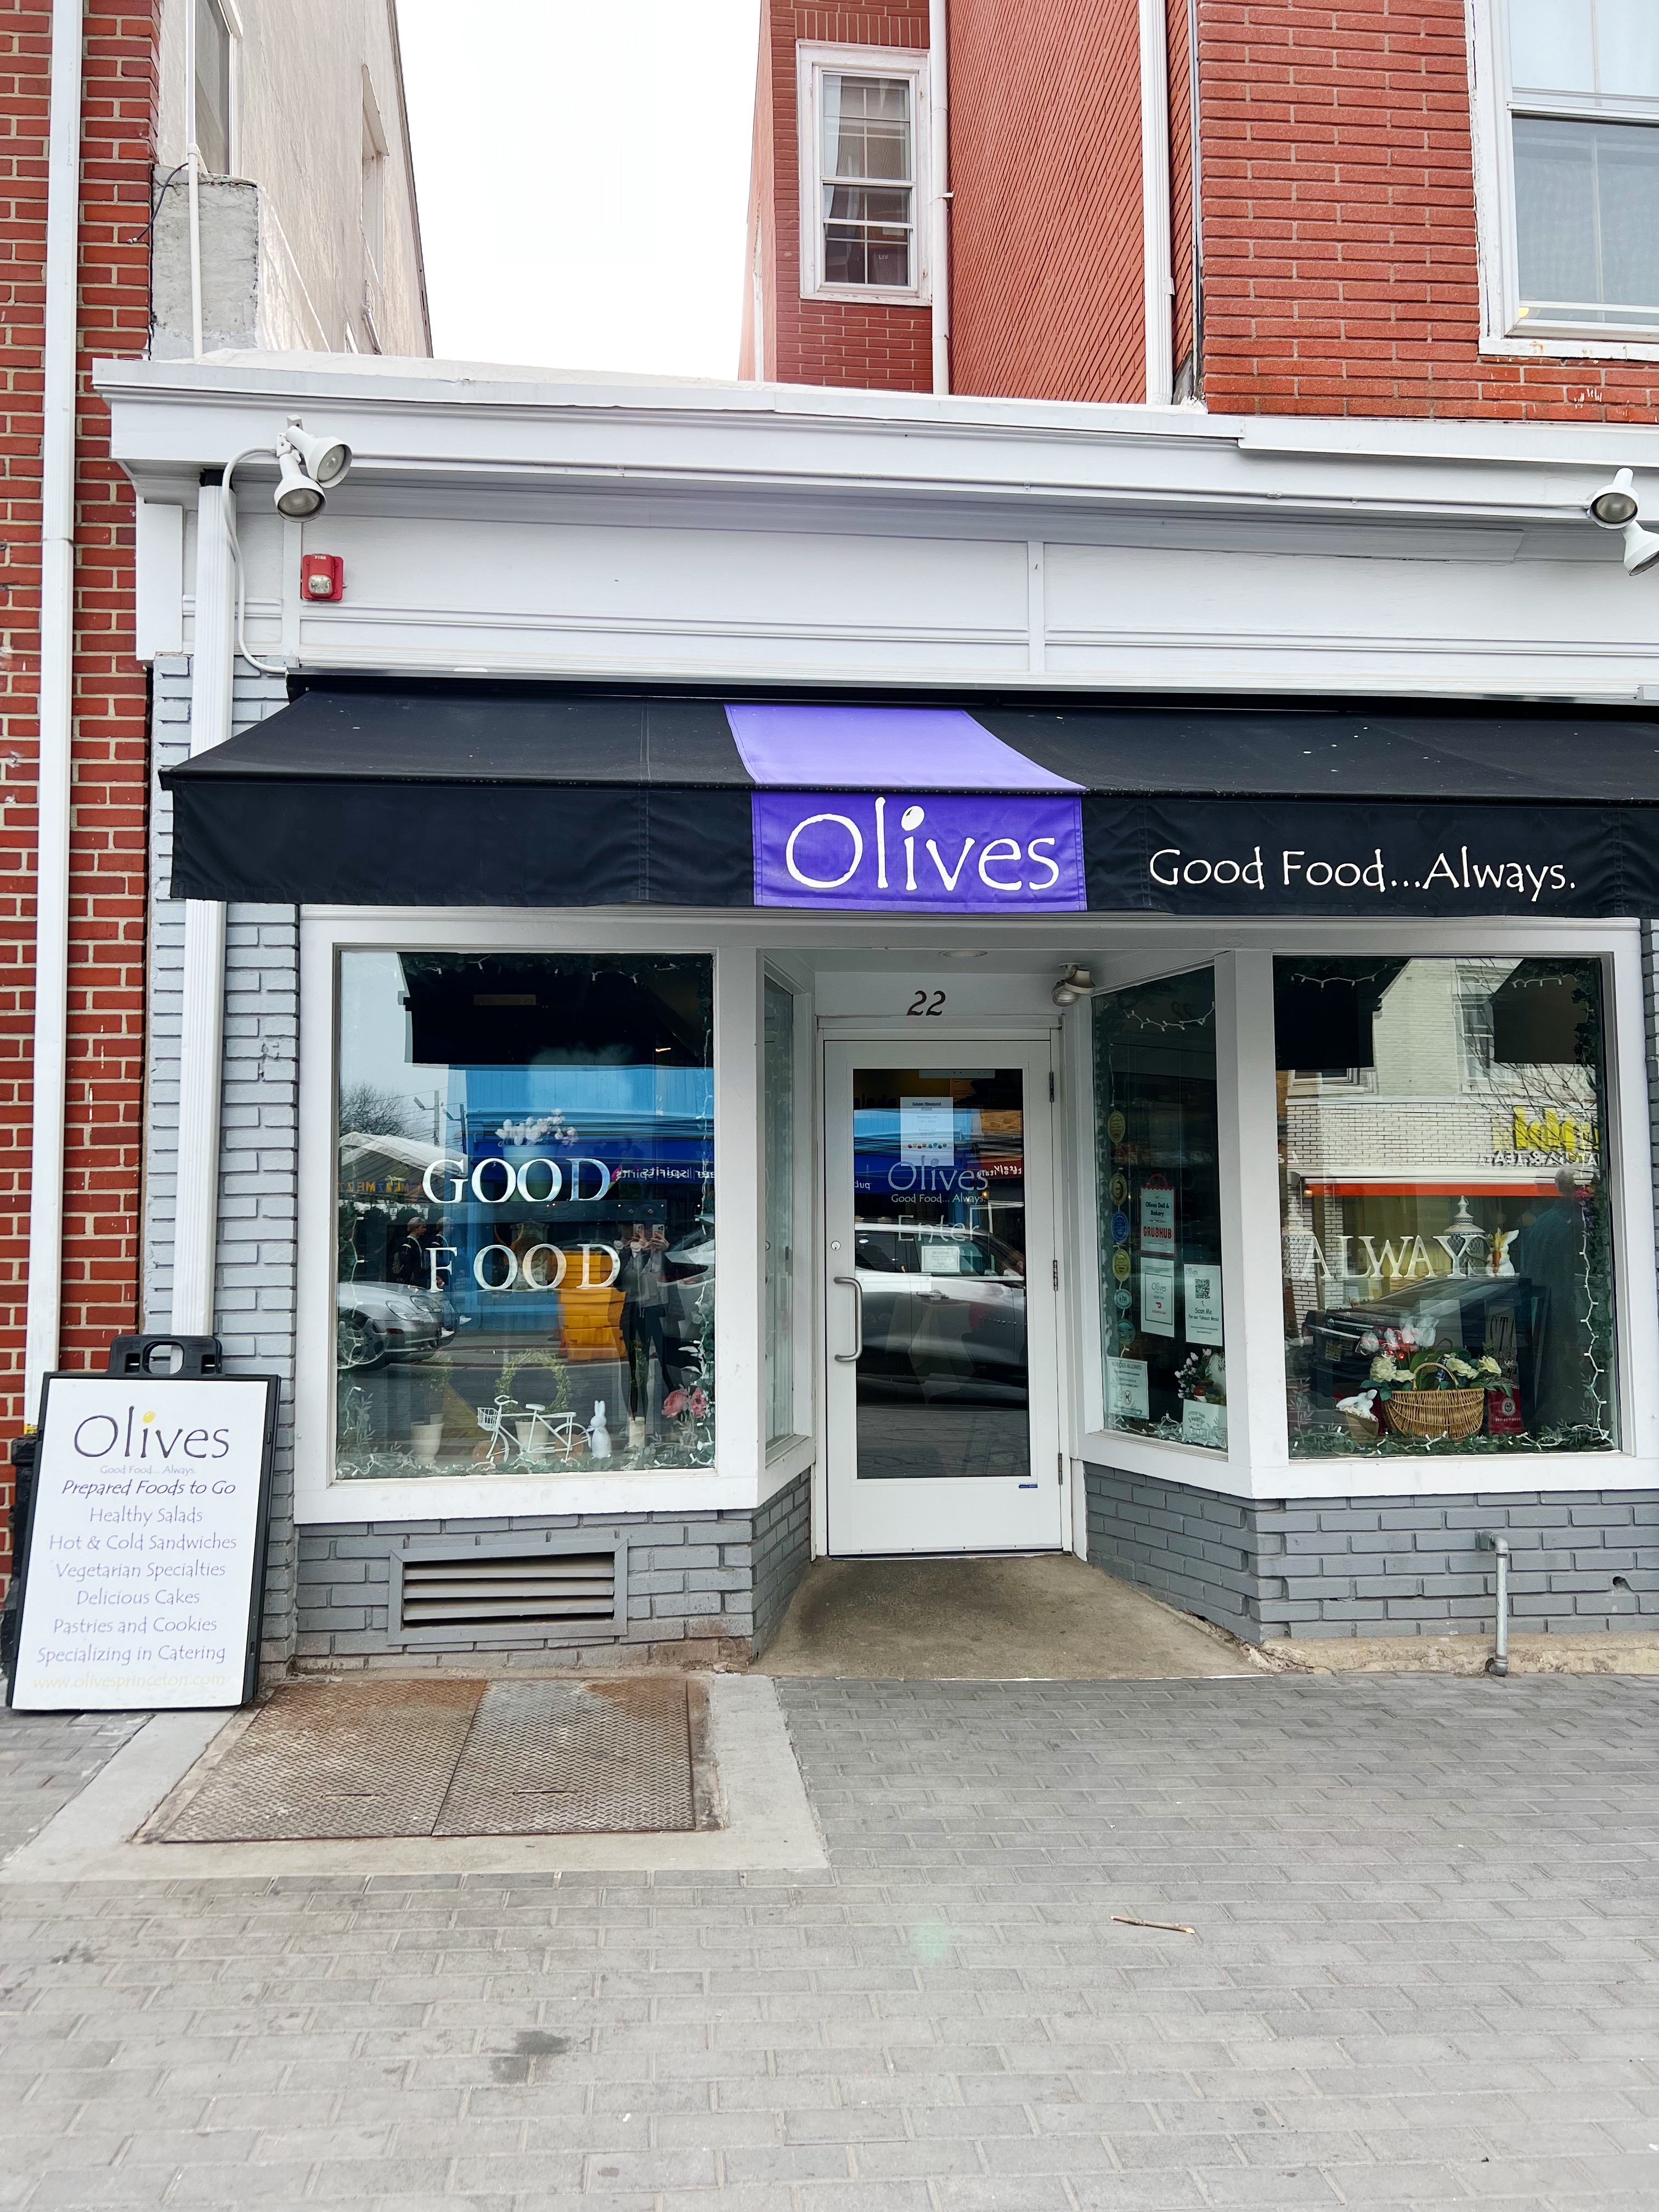 Exterior of Olives, white building with black and purple "Olives" awning